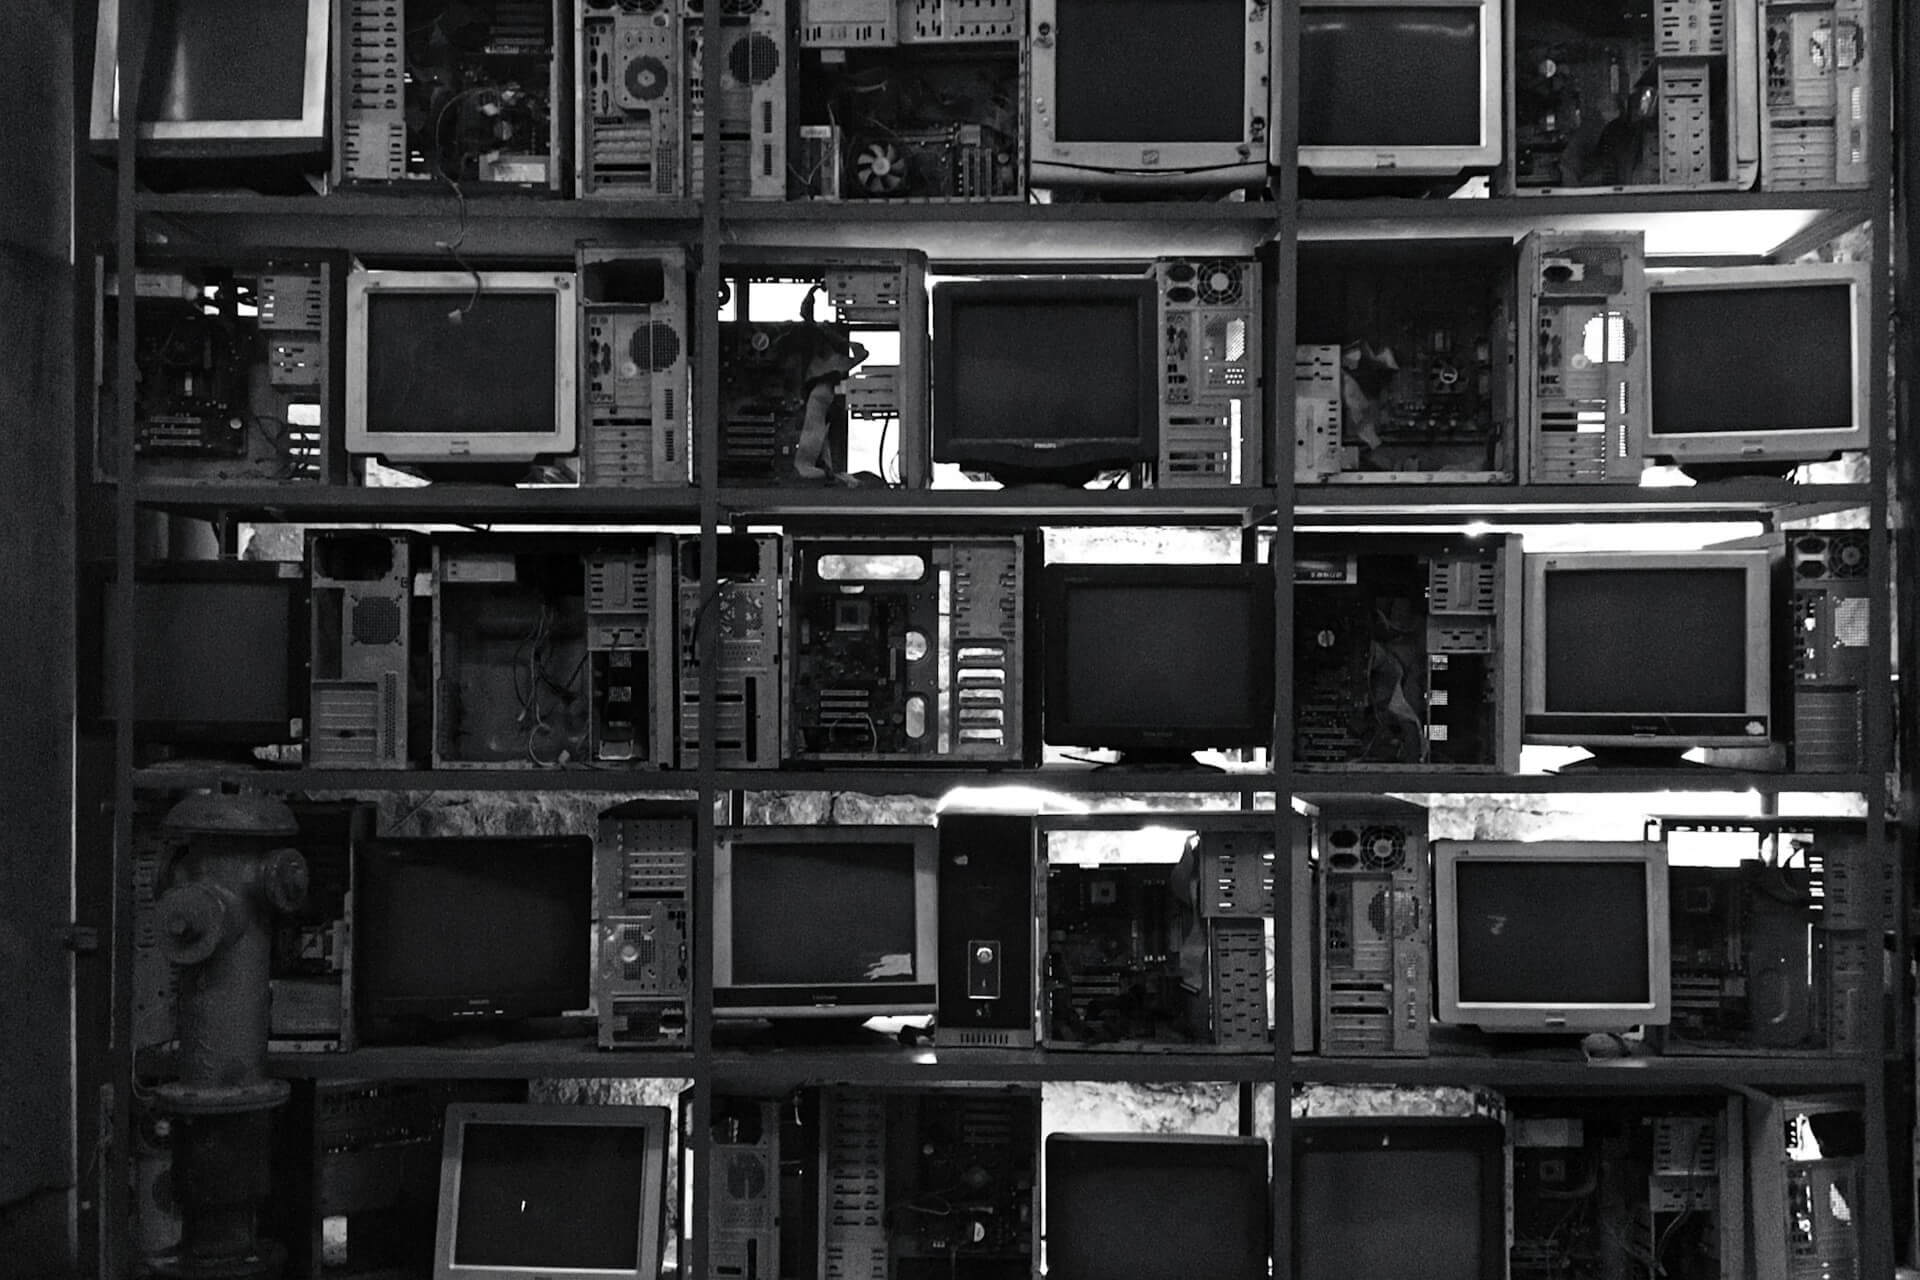 Black-and-white photograph of shelves loaded with broken desktop computers and monitors